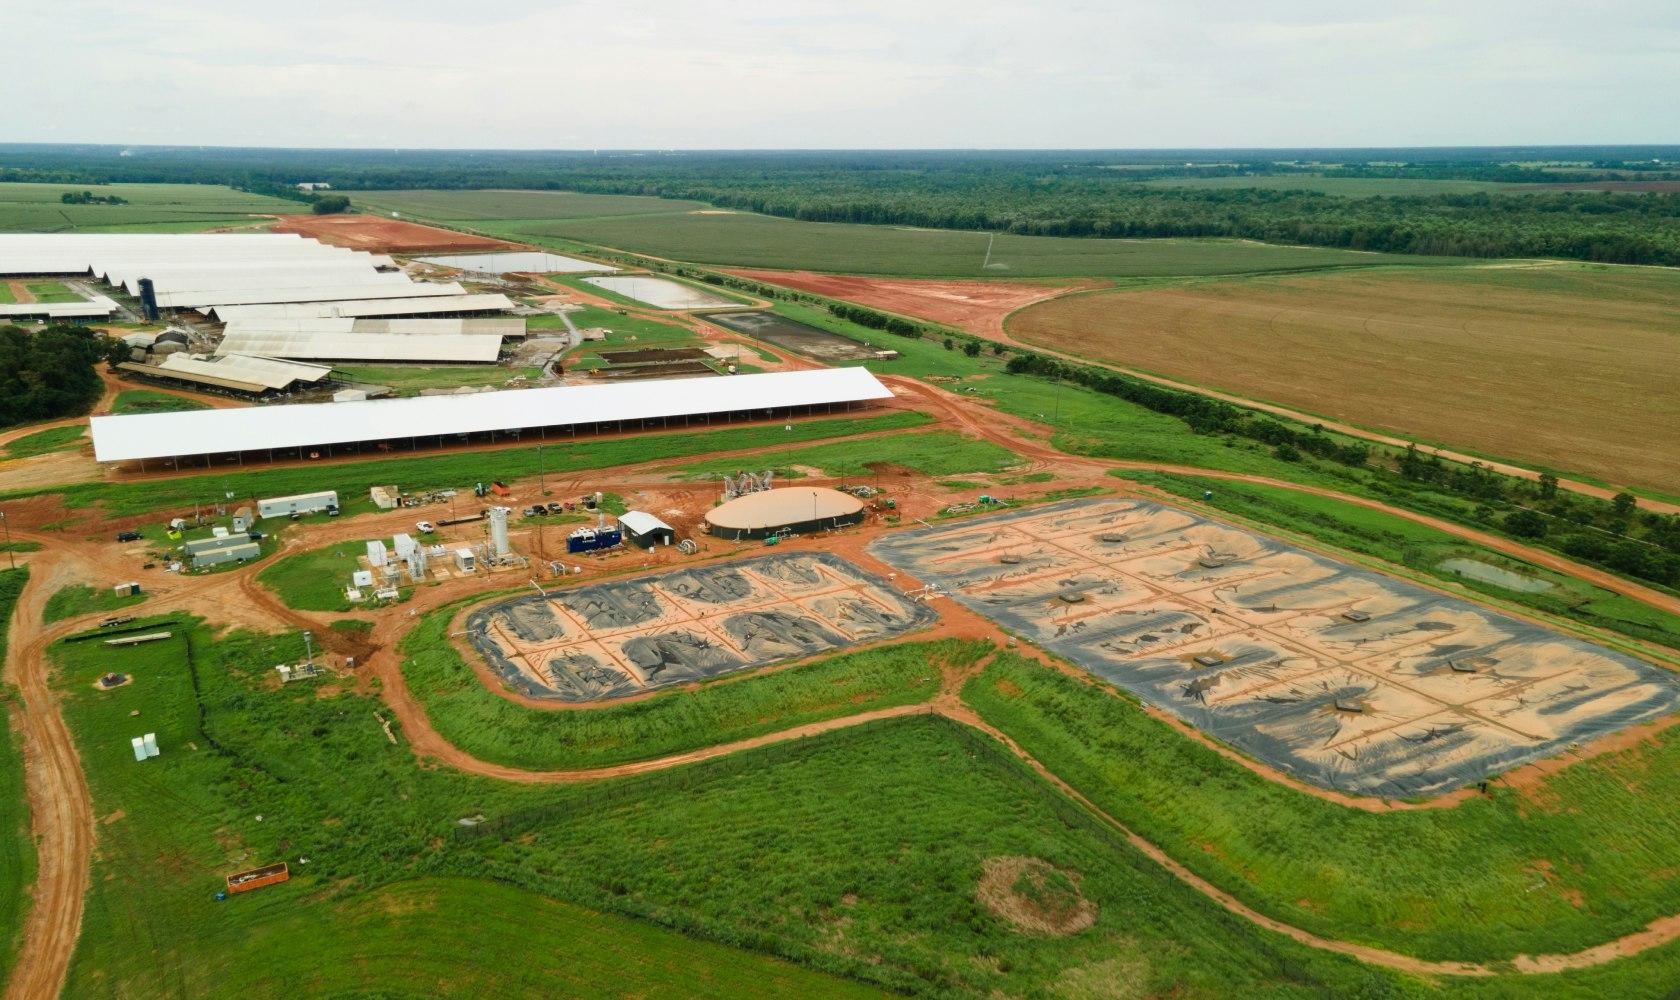 Aerial view of a farm that practices regenerative agriculture